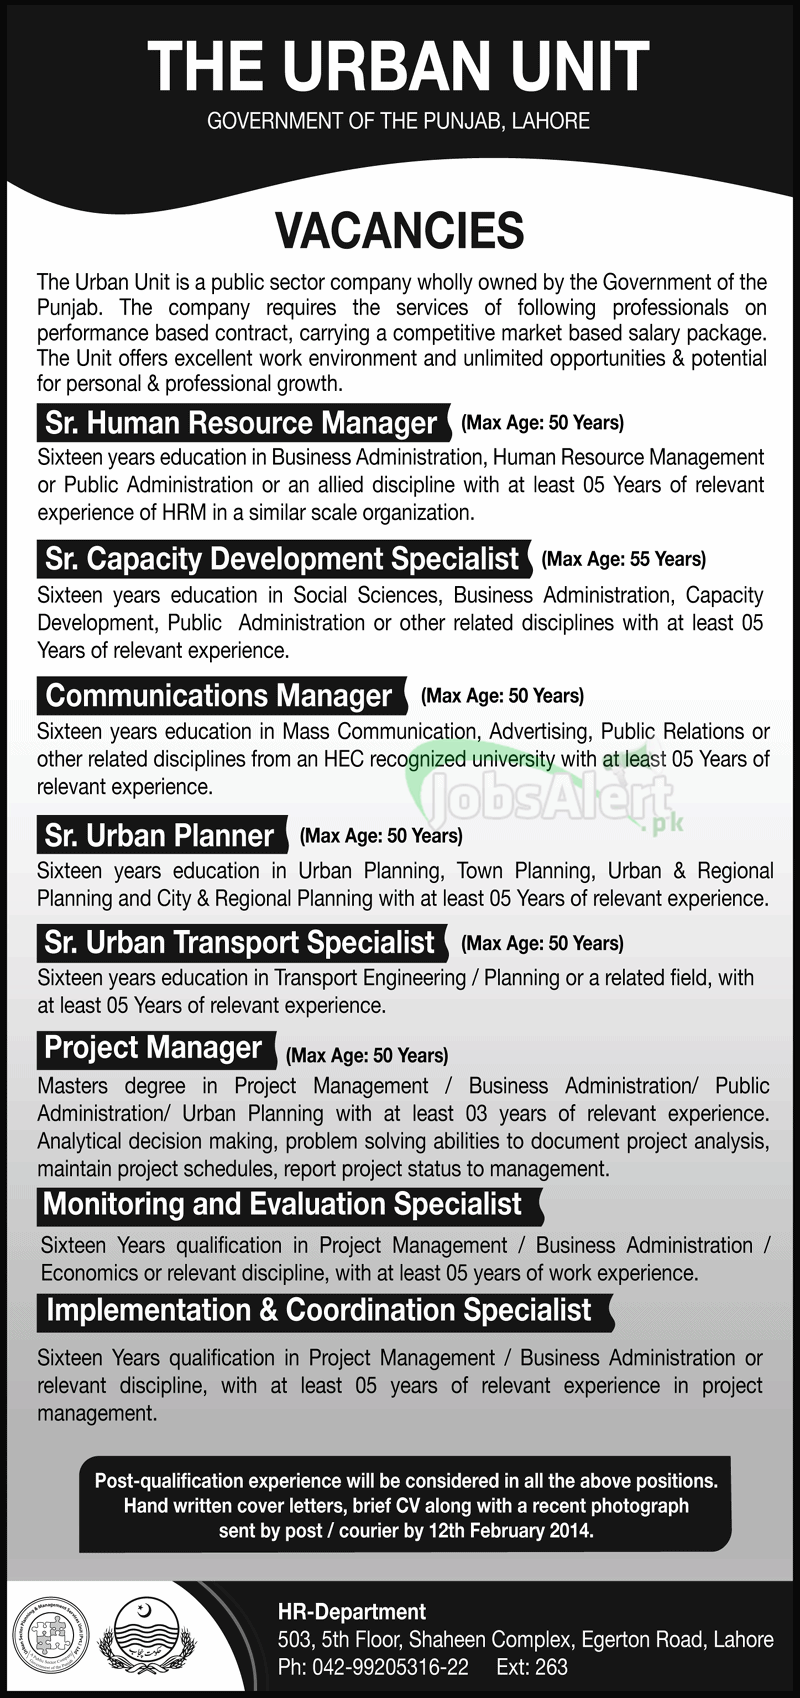 Jobs 2014 in The Urban Unit Government of the Punjab LHR.